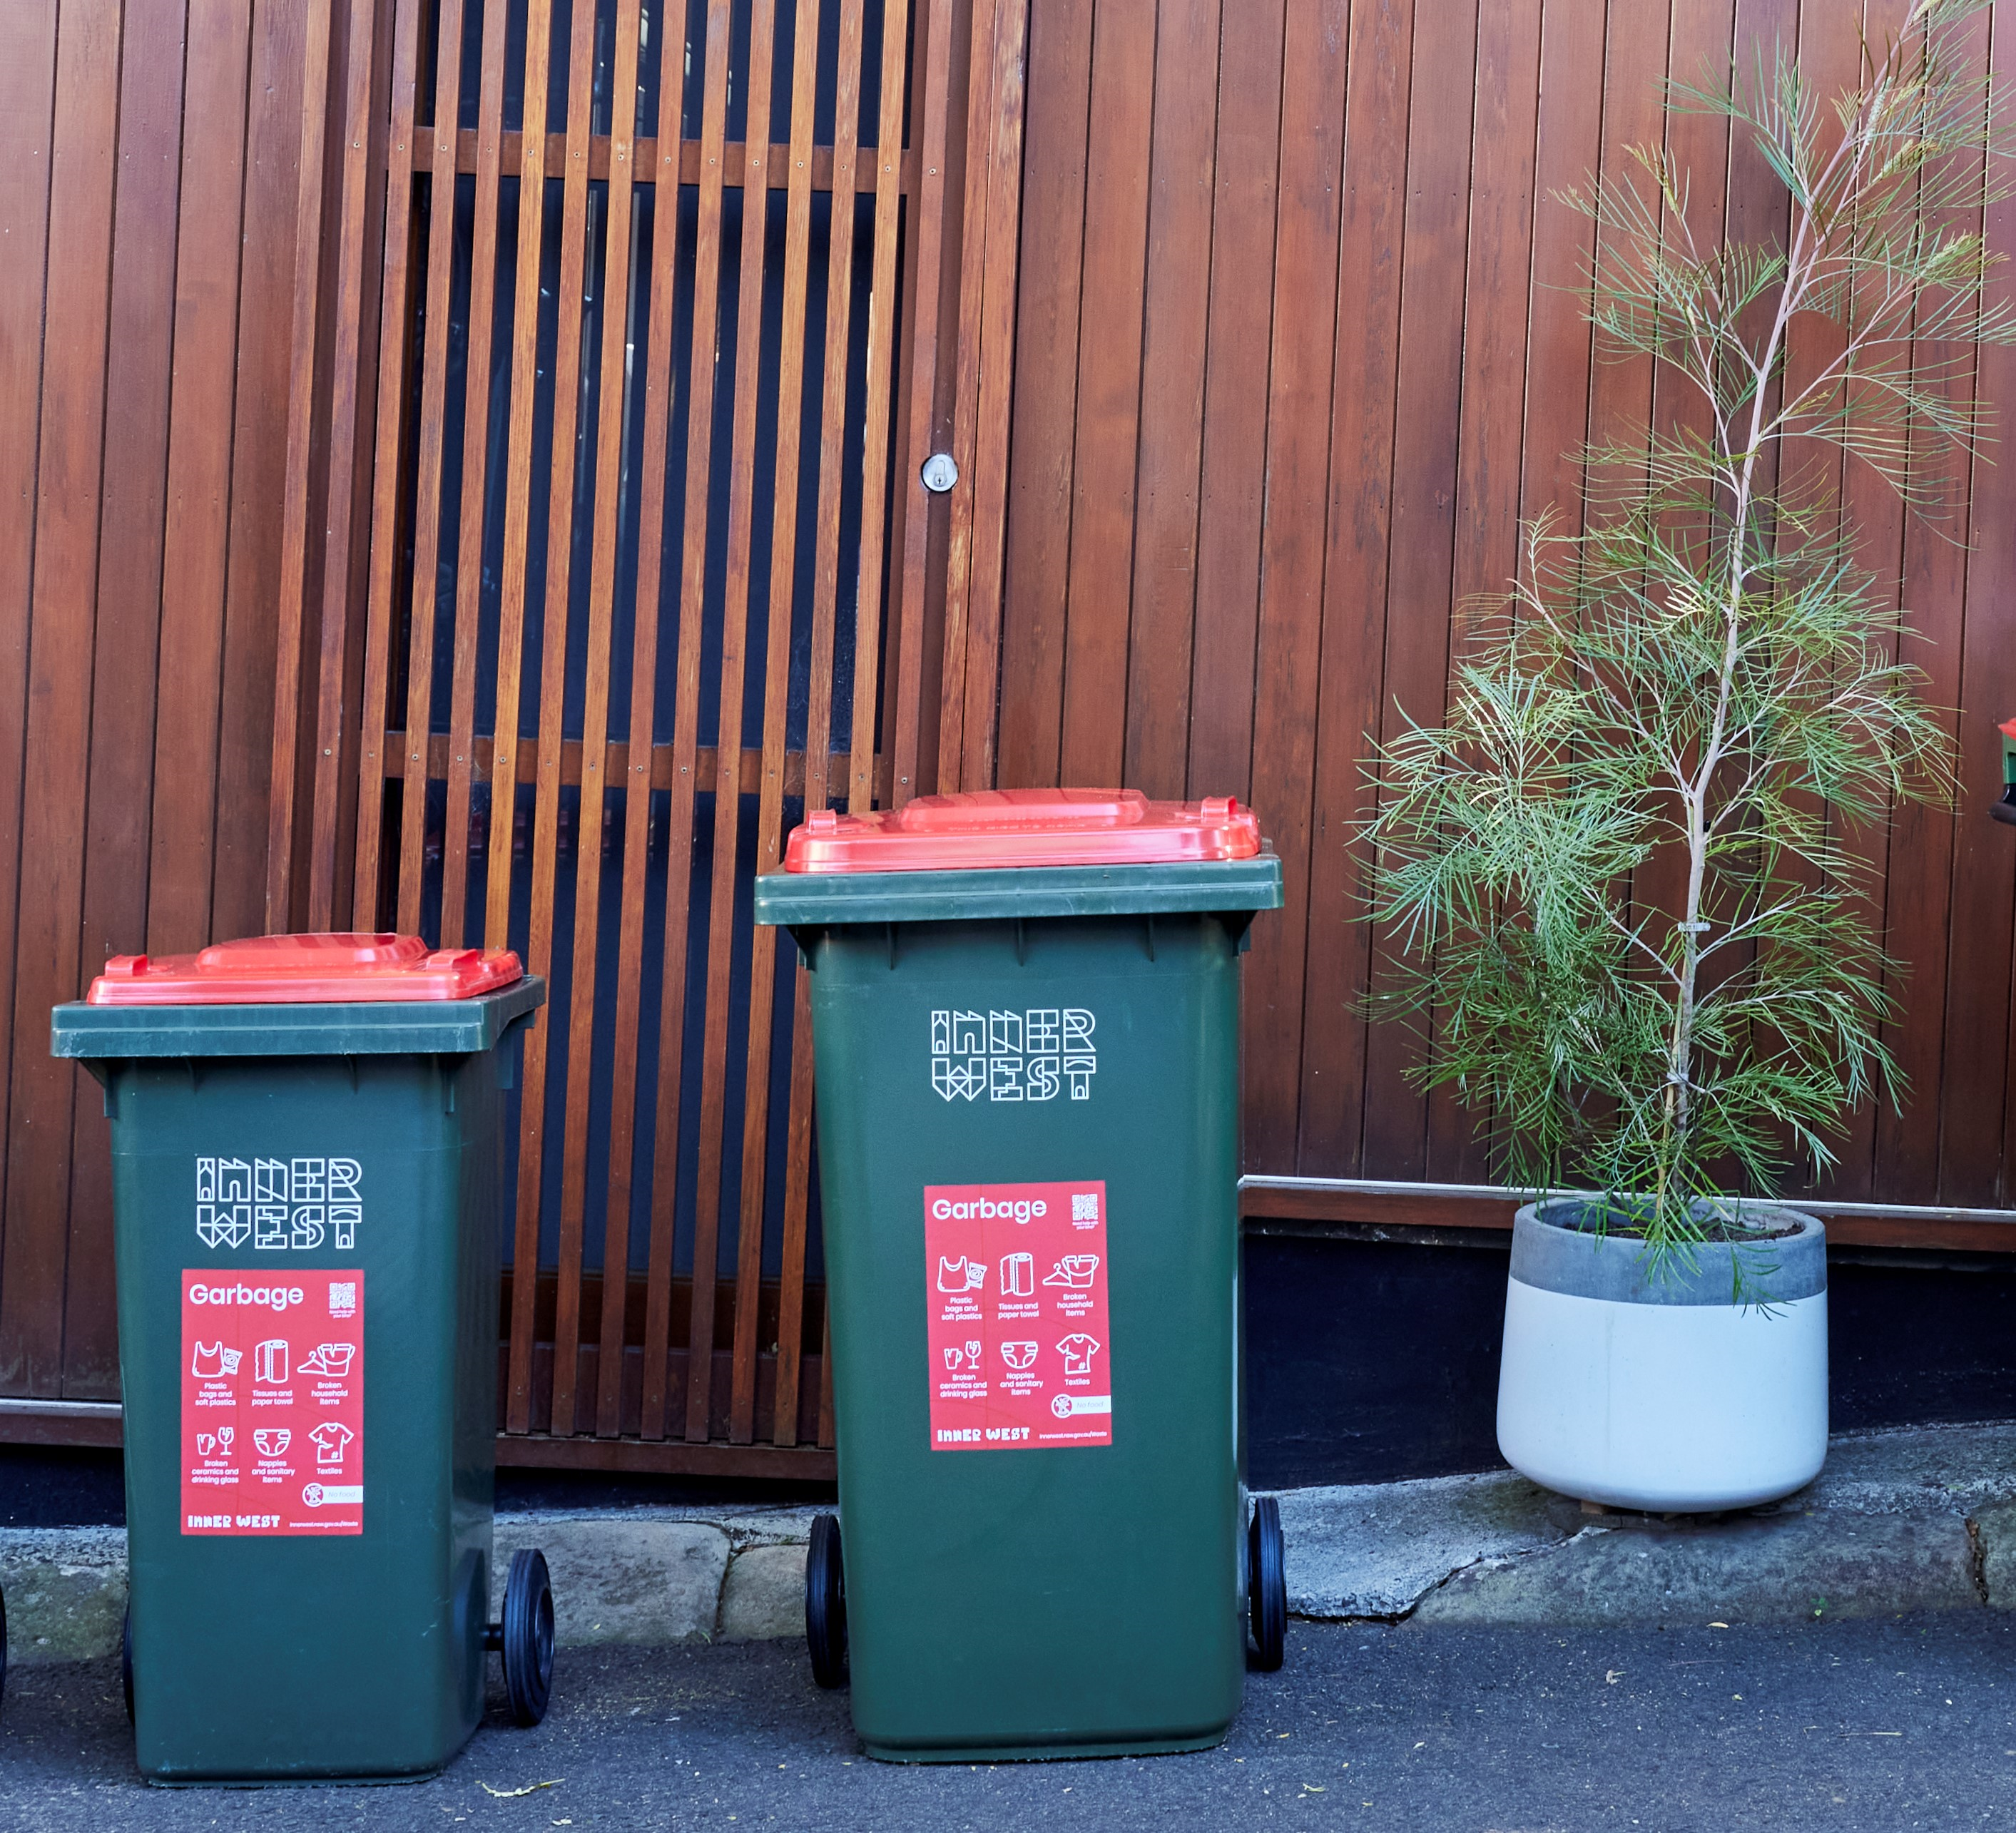 Two red bins on the street